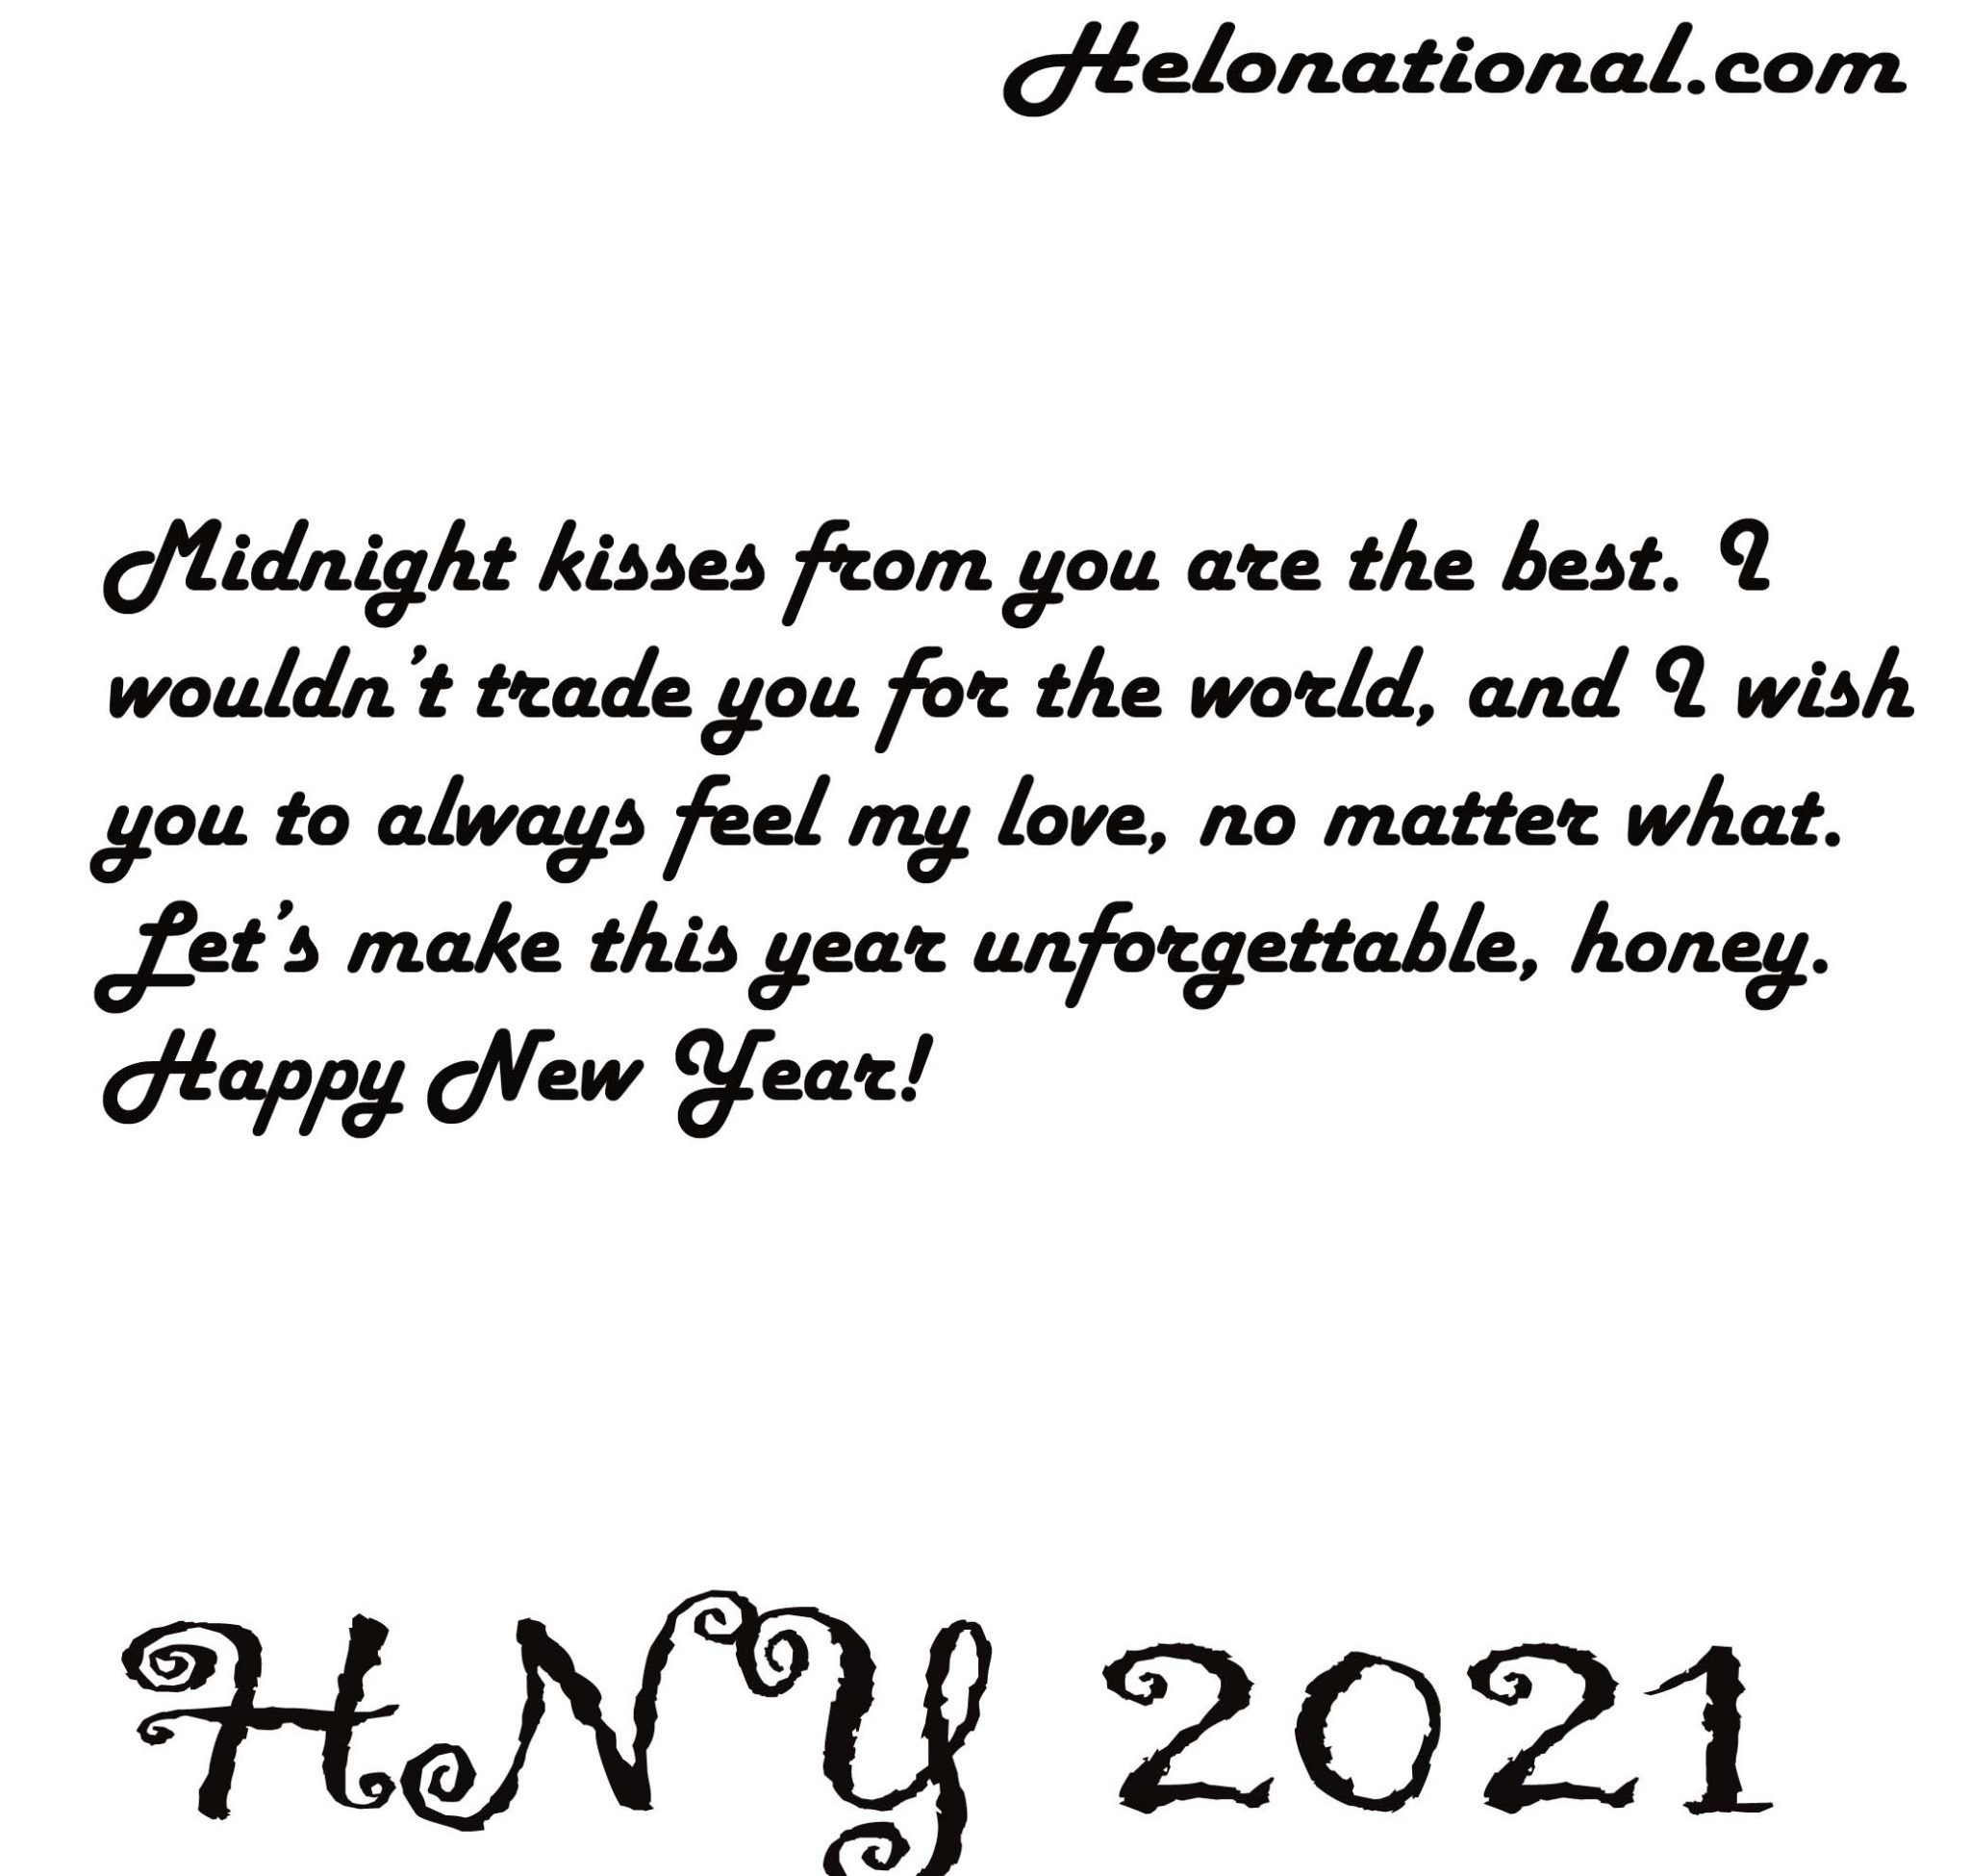 Get Happy New Year 2021 Quotes, Image, Wishes